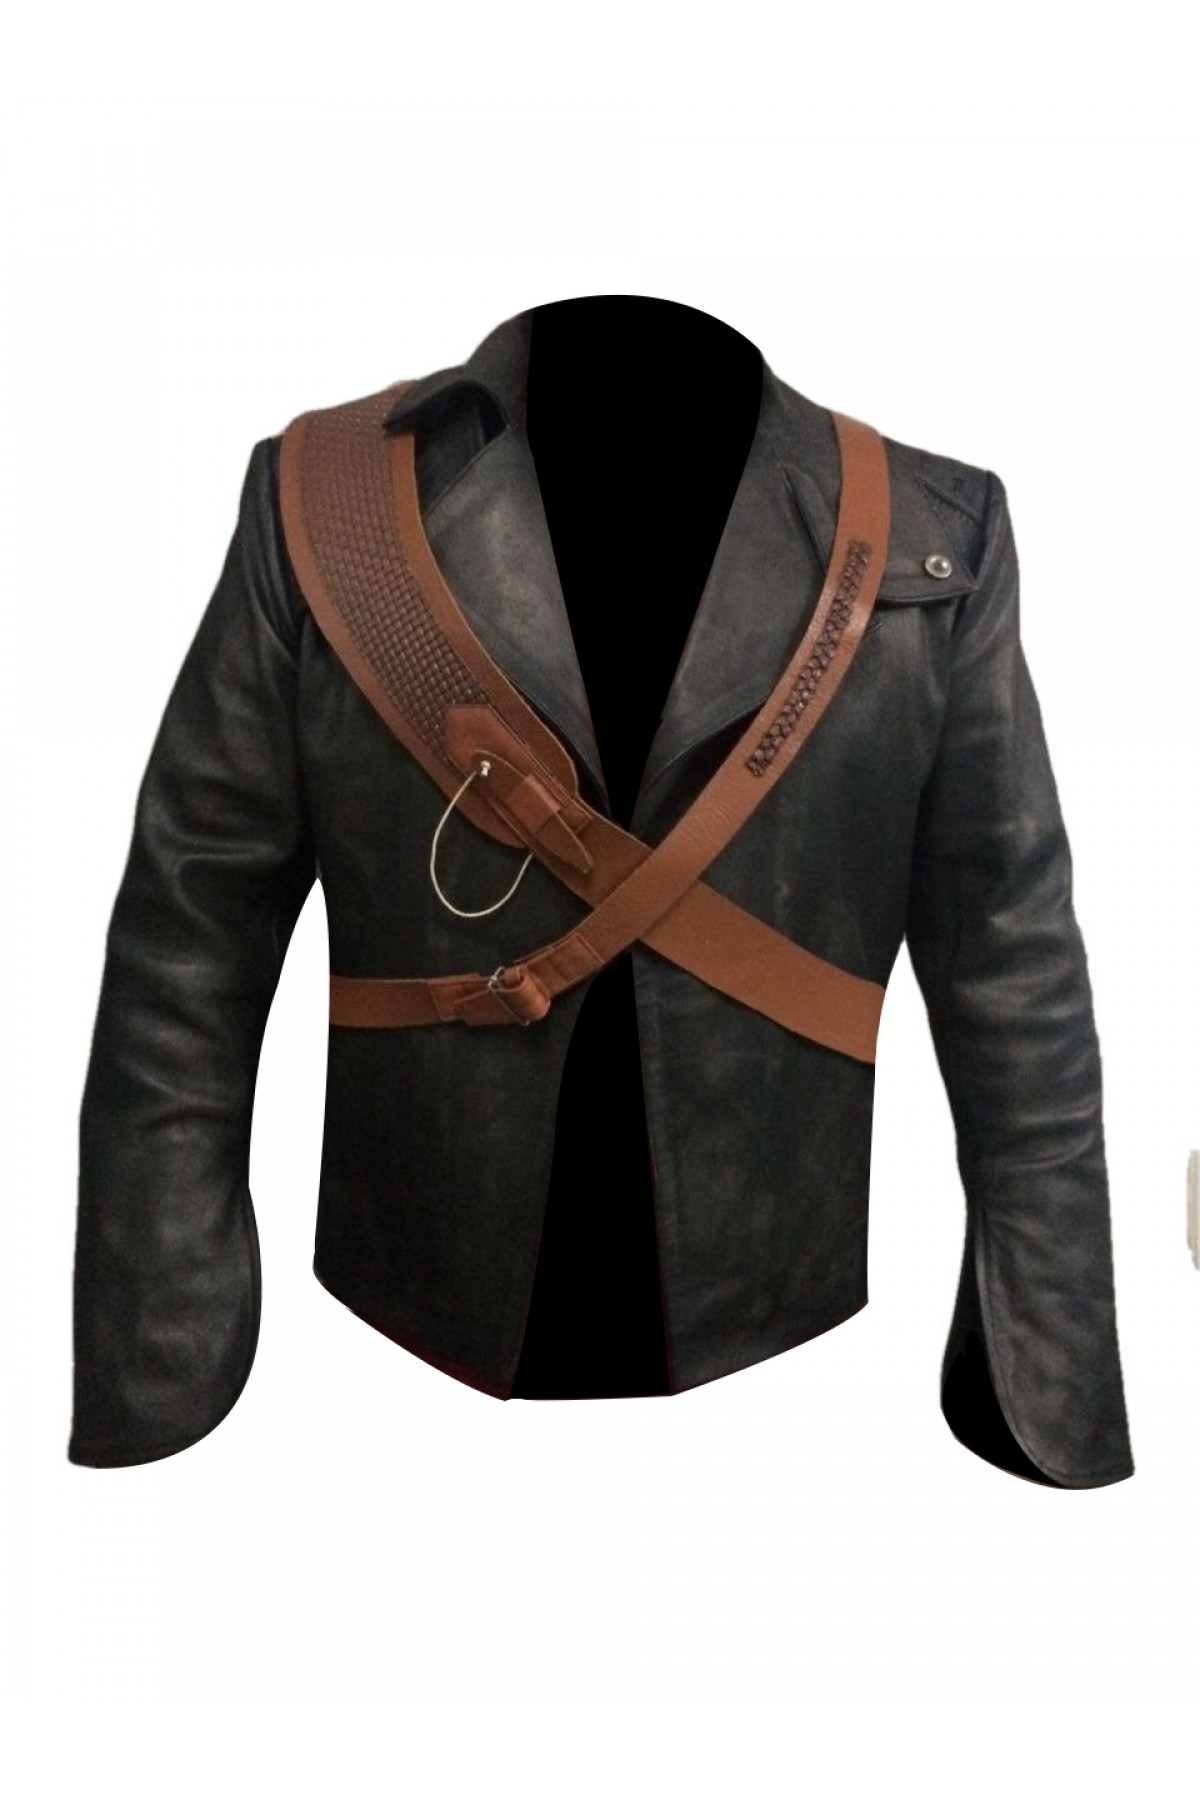 Wil Ohmsford The Shannara Chronicles Leather Jacket